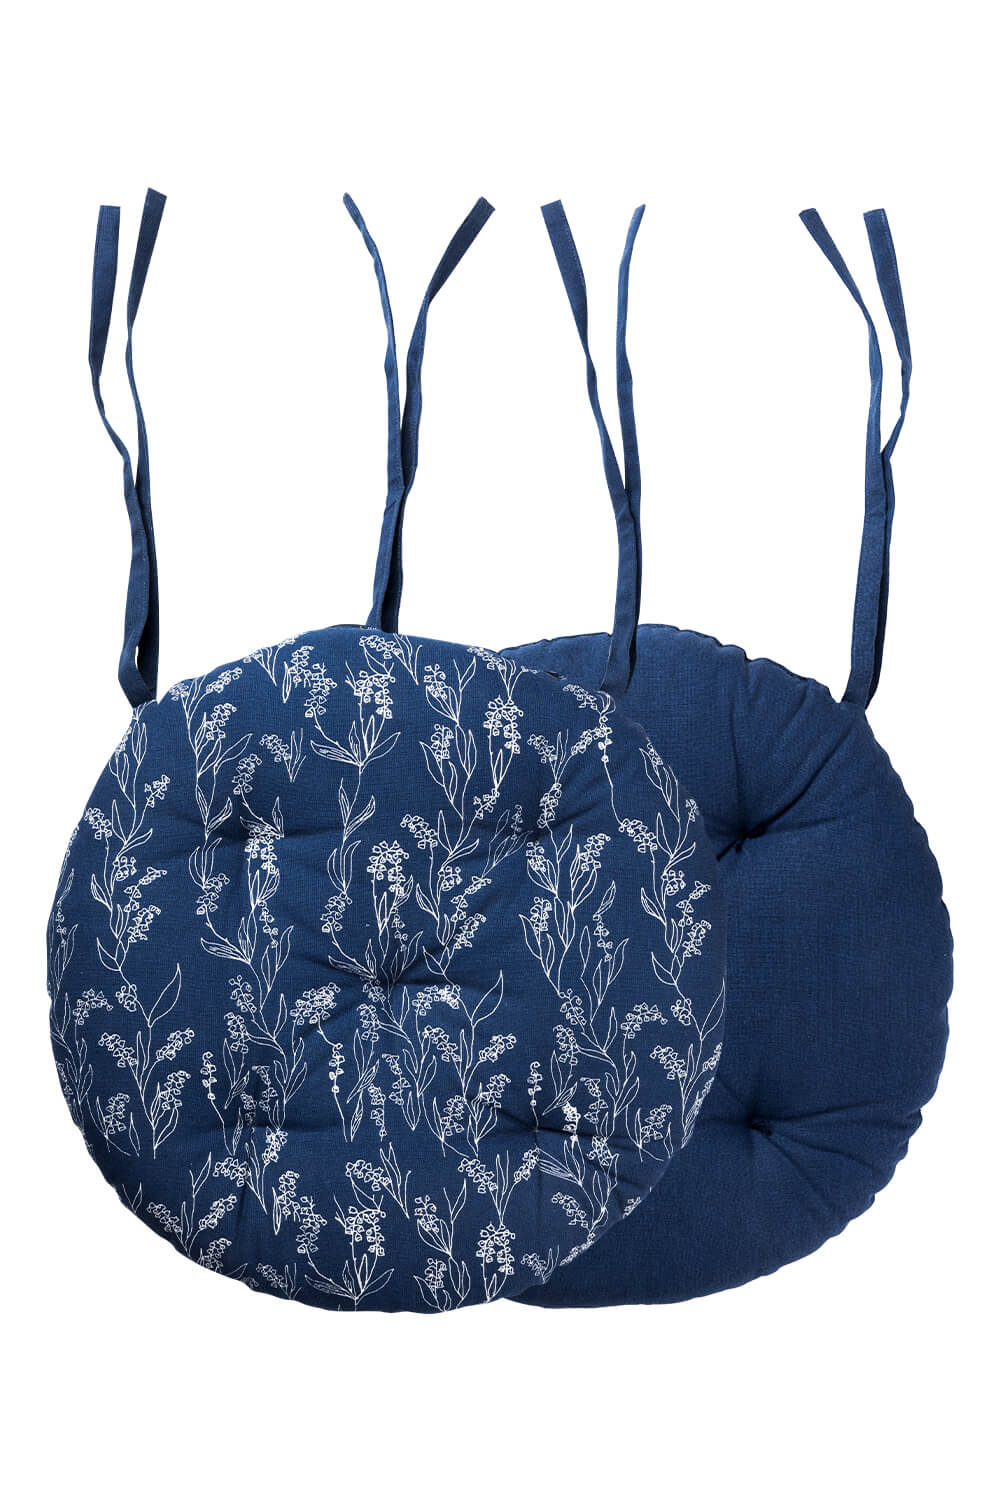 Tranquillo Chair Cushion - Floral - Sustainable